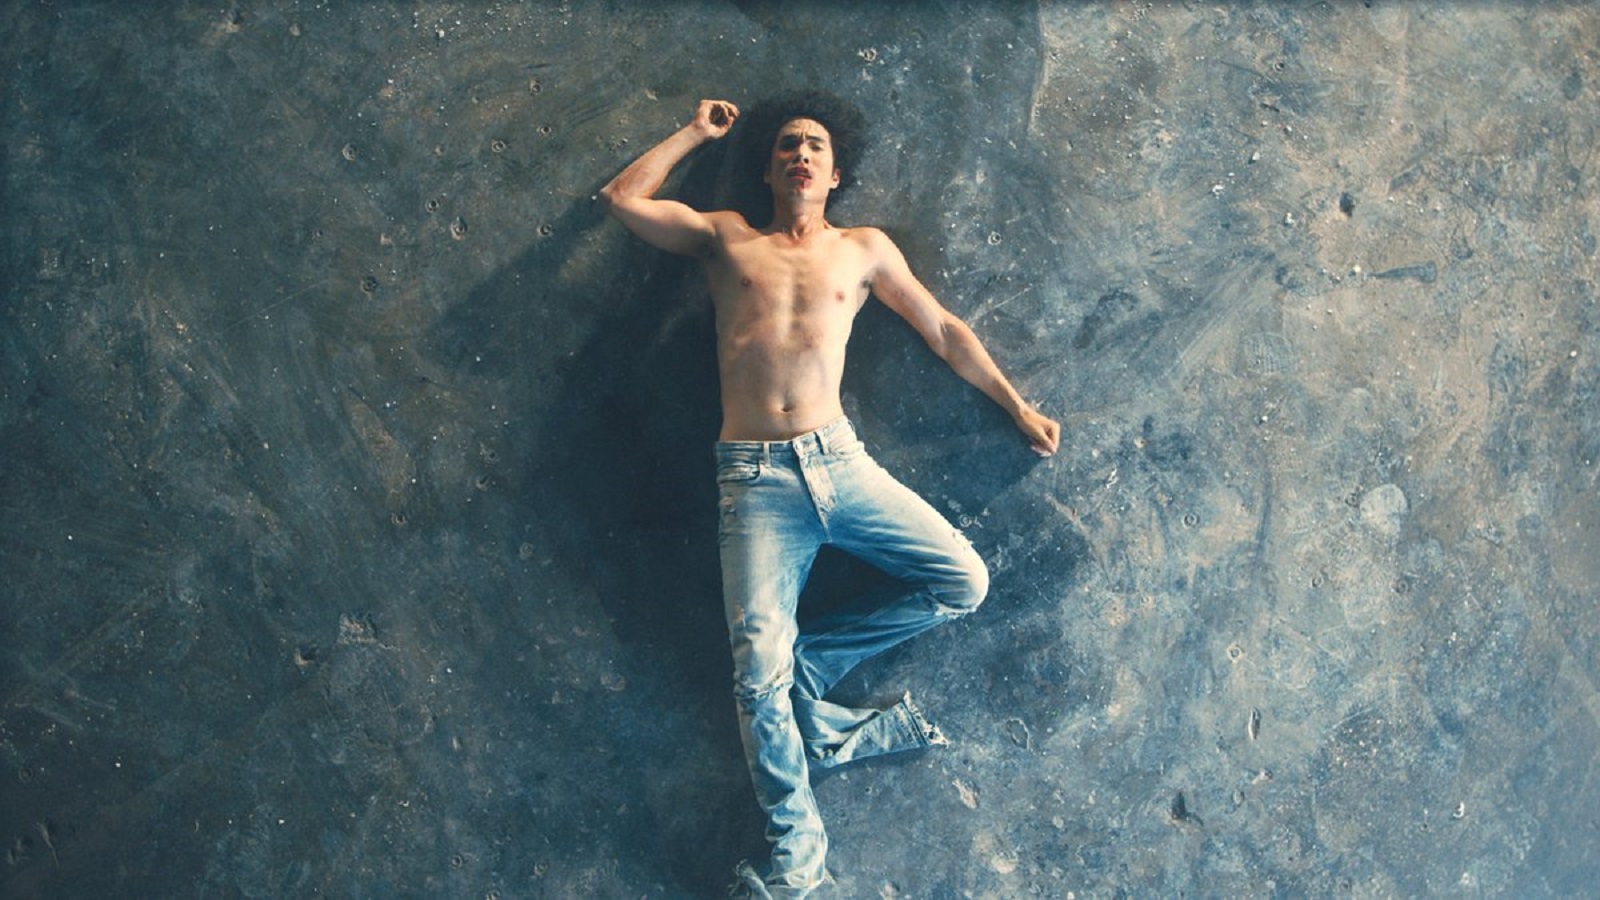 The Try Guys star Eugene Lee Yang comes out in powerful dance video |  PinkNews